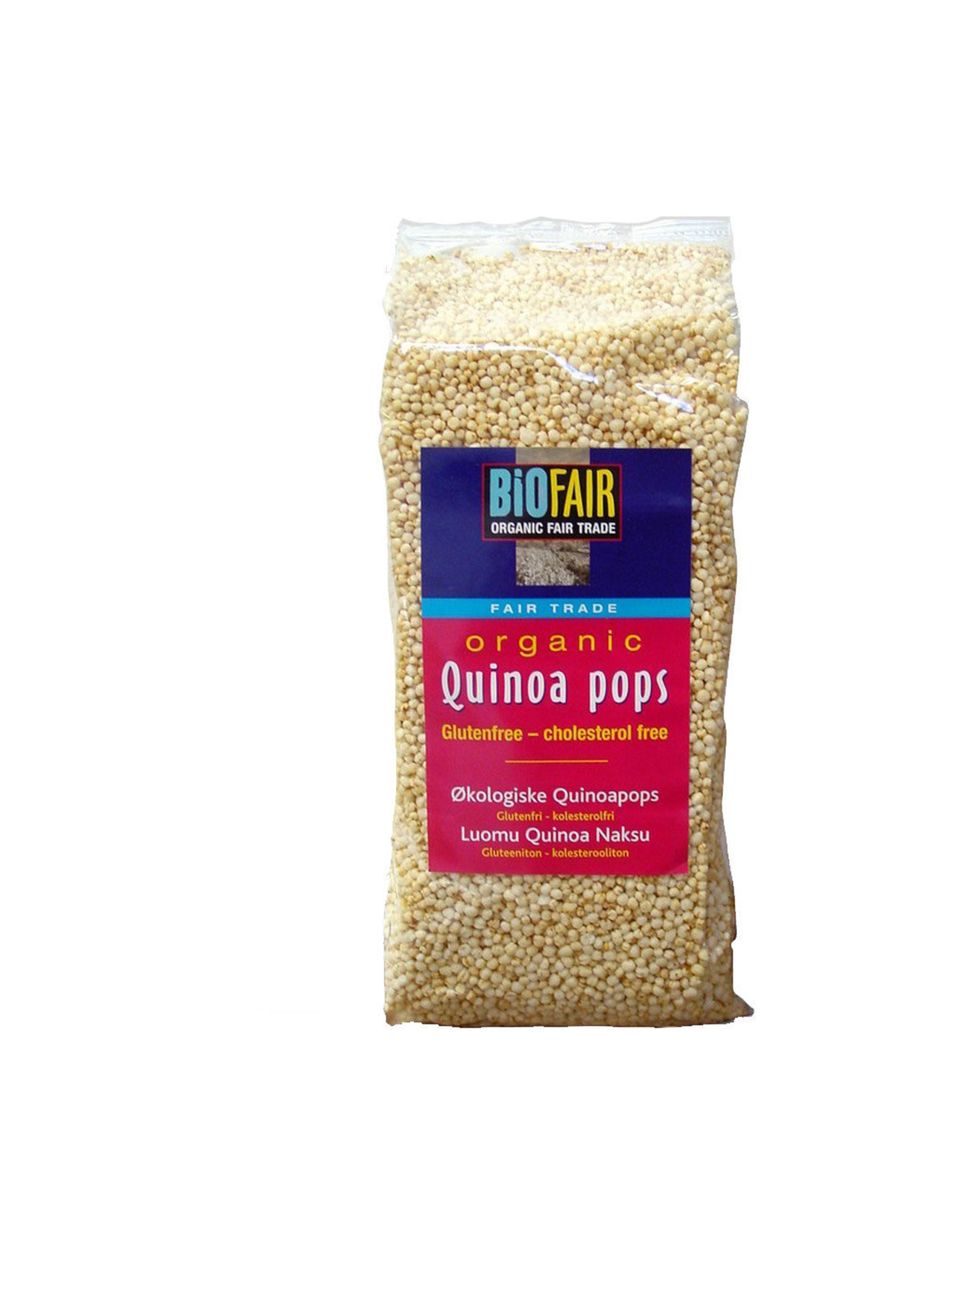 <p>Searching for an alternative to sugary cereals and sick of porridge this winter? Enter Biofair Organic Fairtrade Quinaoa Pops, £3.75 (<a href="http://www.planetorganic.com/biofair-organic-fairtrade-gluten-free-quinoa-pops.html">Planet Organic</a>) - hi